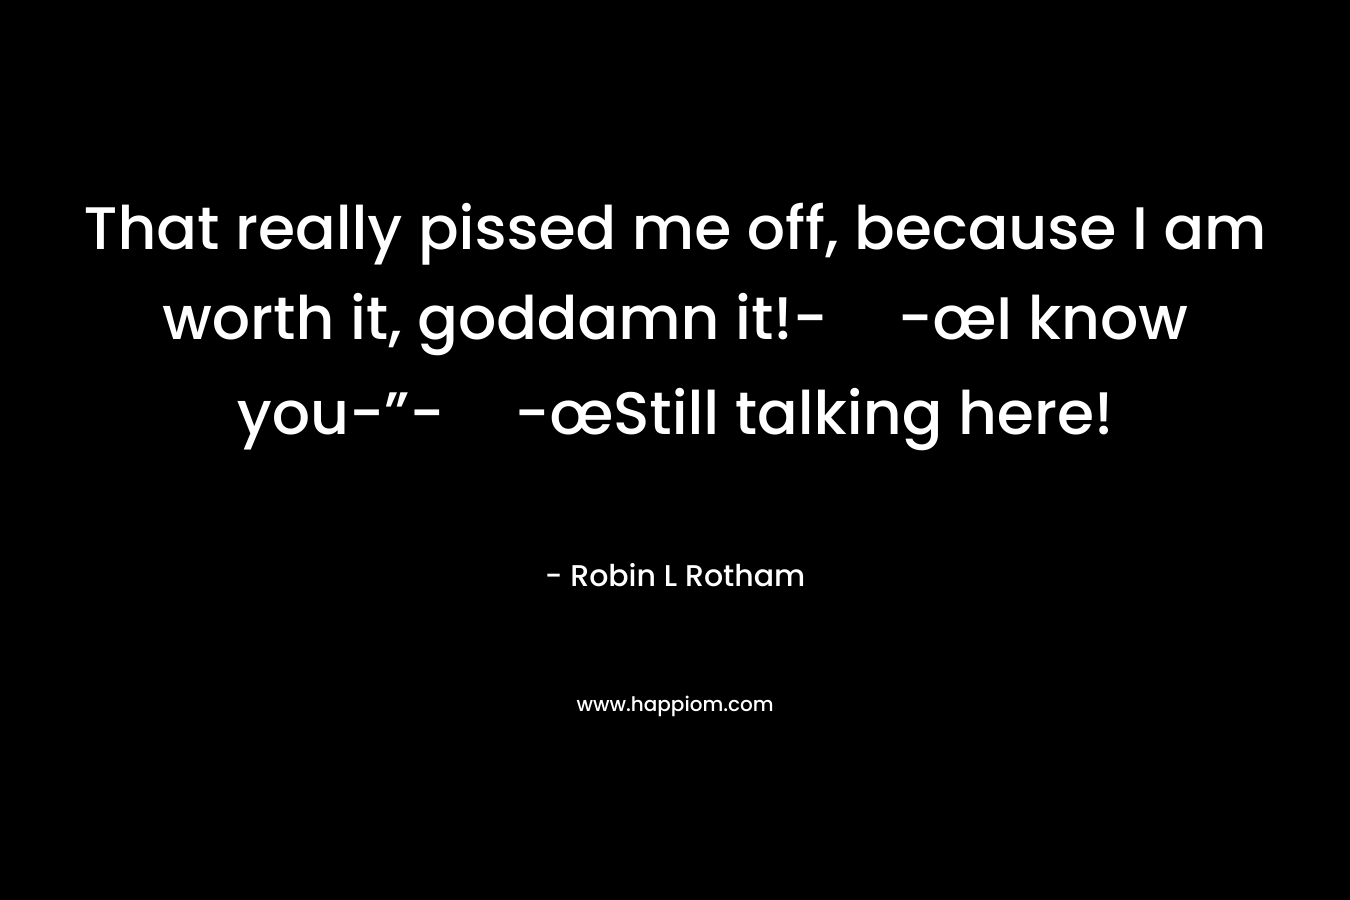 That really pissed me off, because I am worth it, goddamn it!--œI know you-”--œStill talking here! – Robin L Rotham